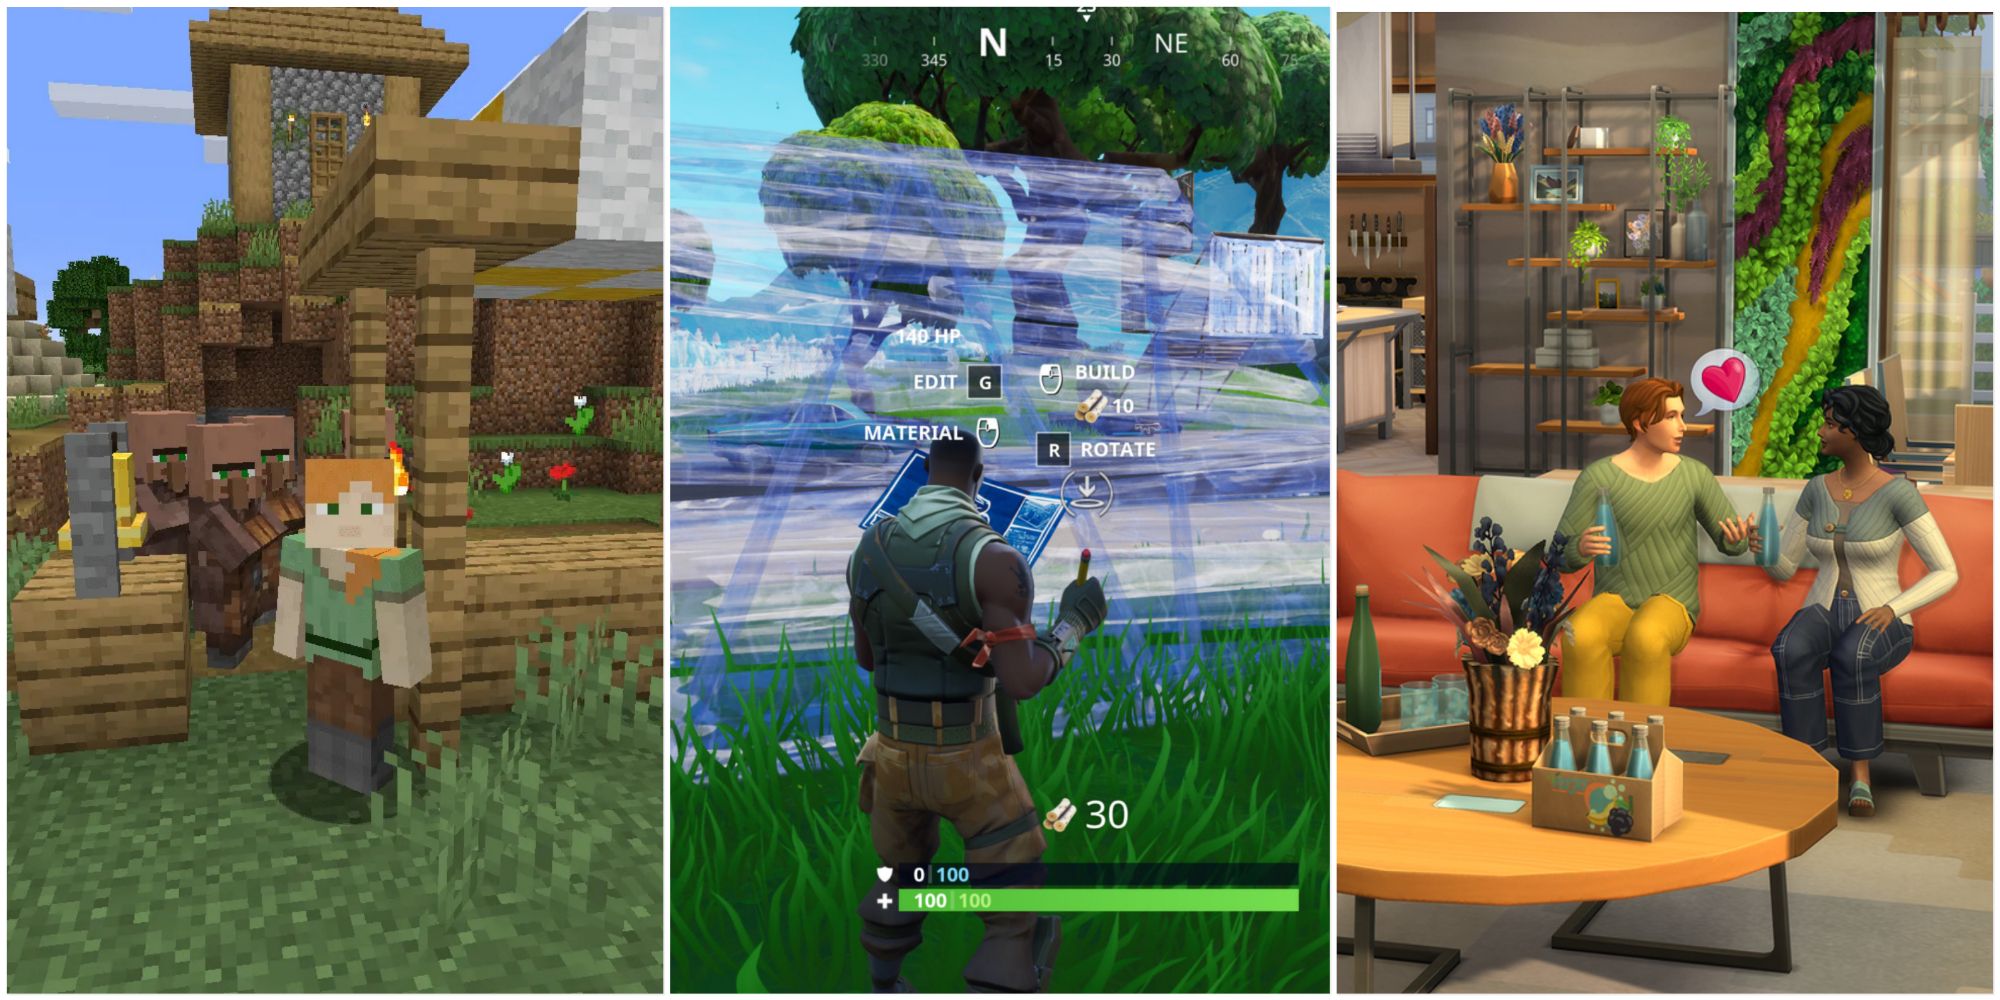 games to sink hours into minecraft fortnite sims 4